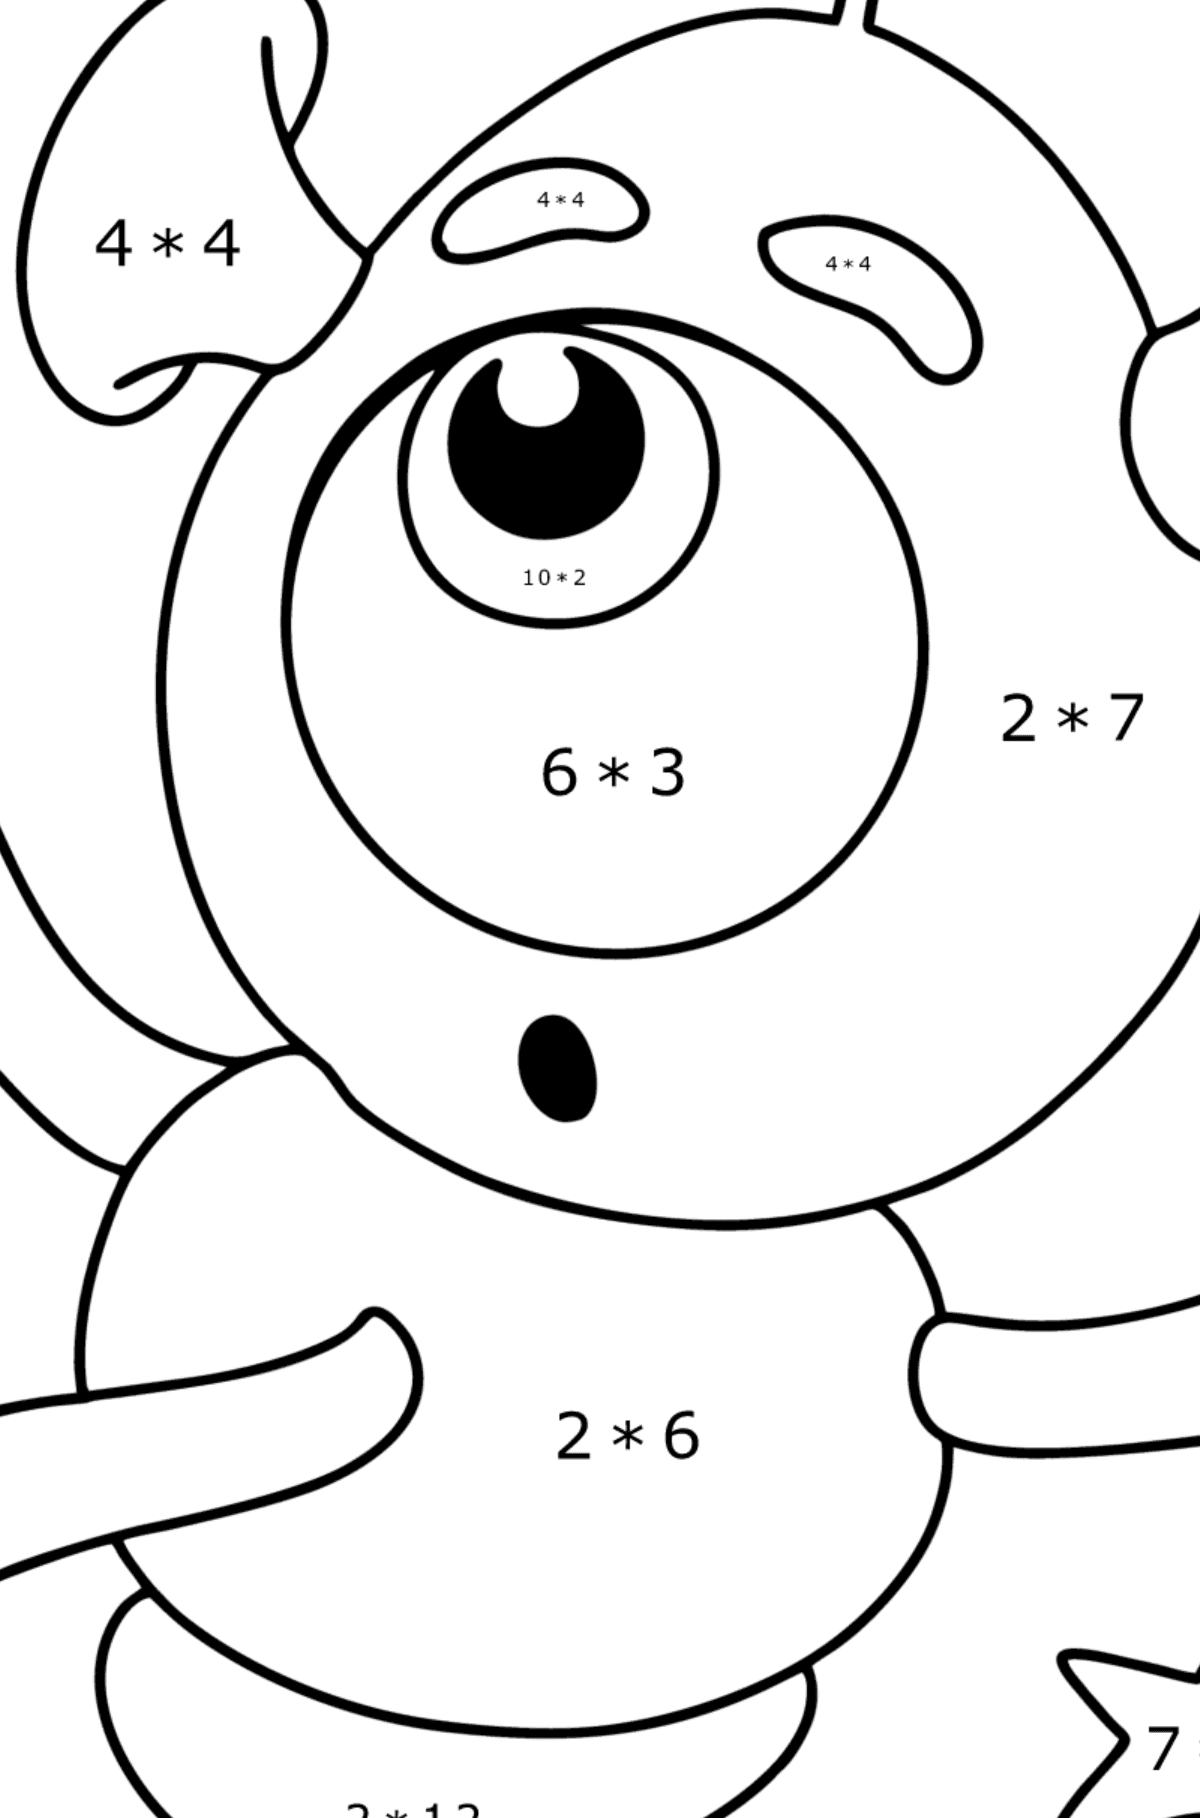 Little Alien Coloring page - Math Coloring - Multiplication for Kids